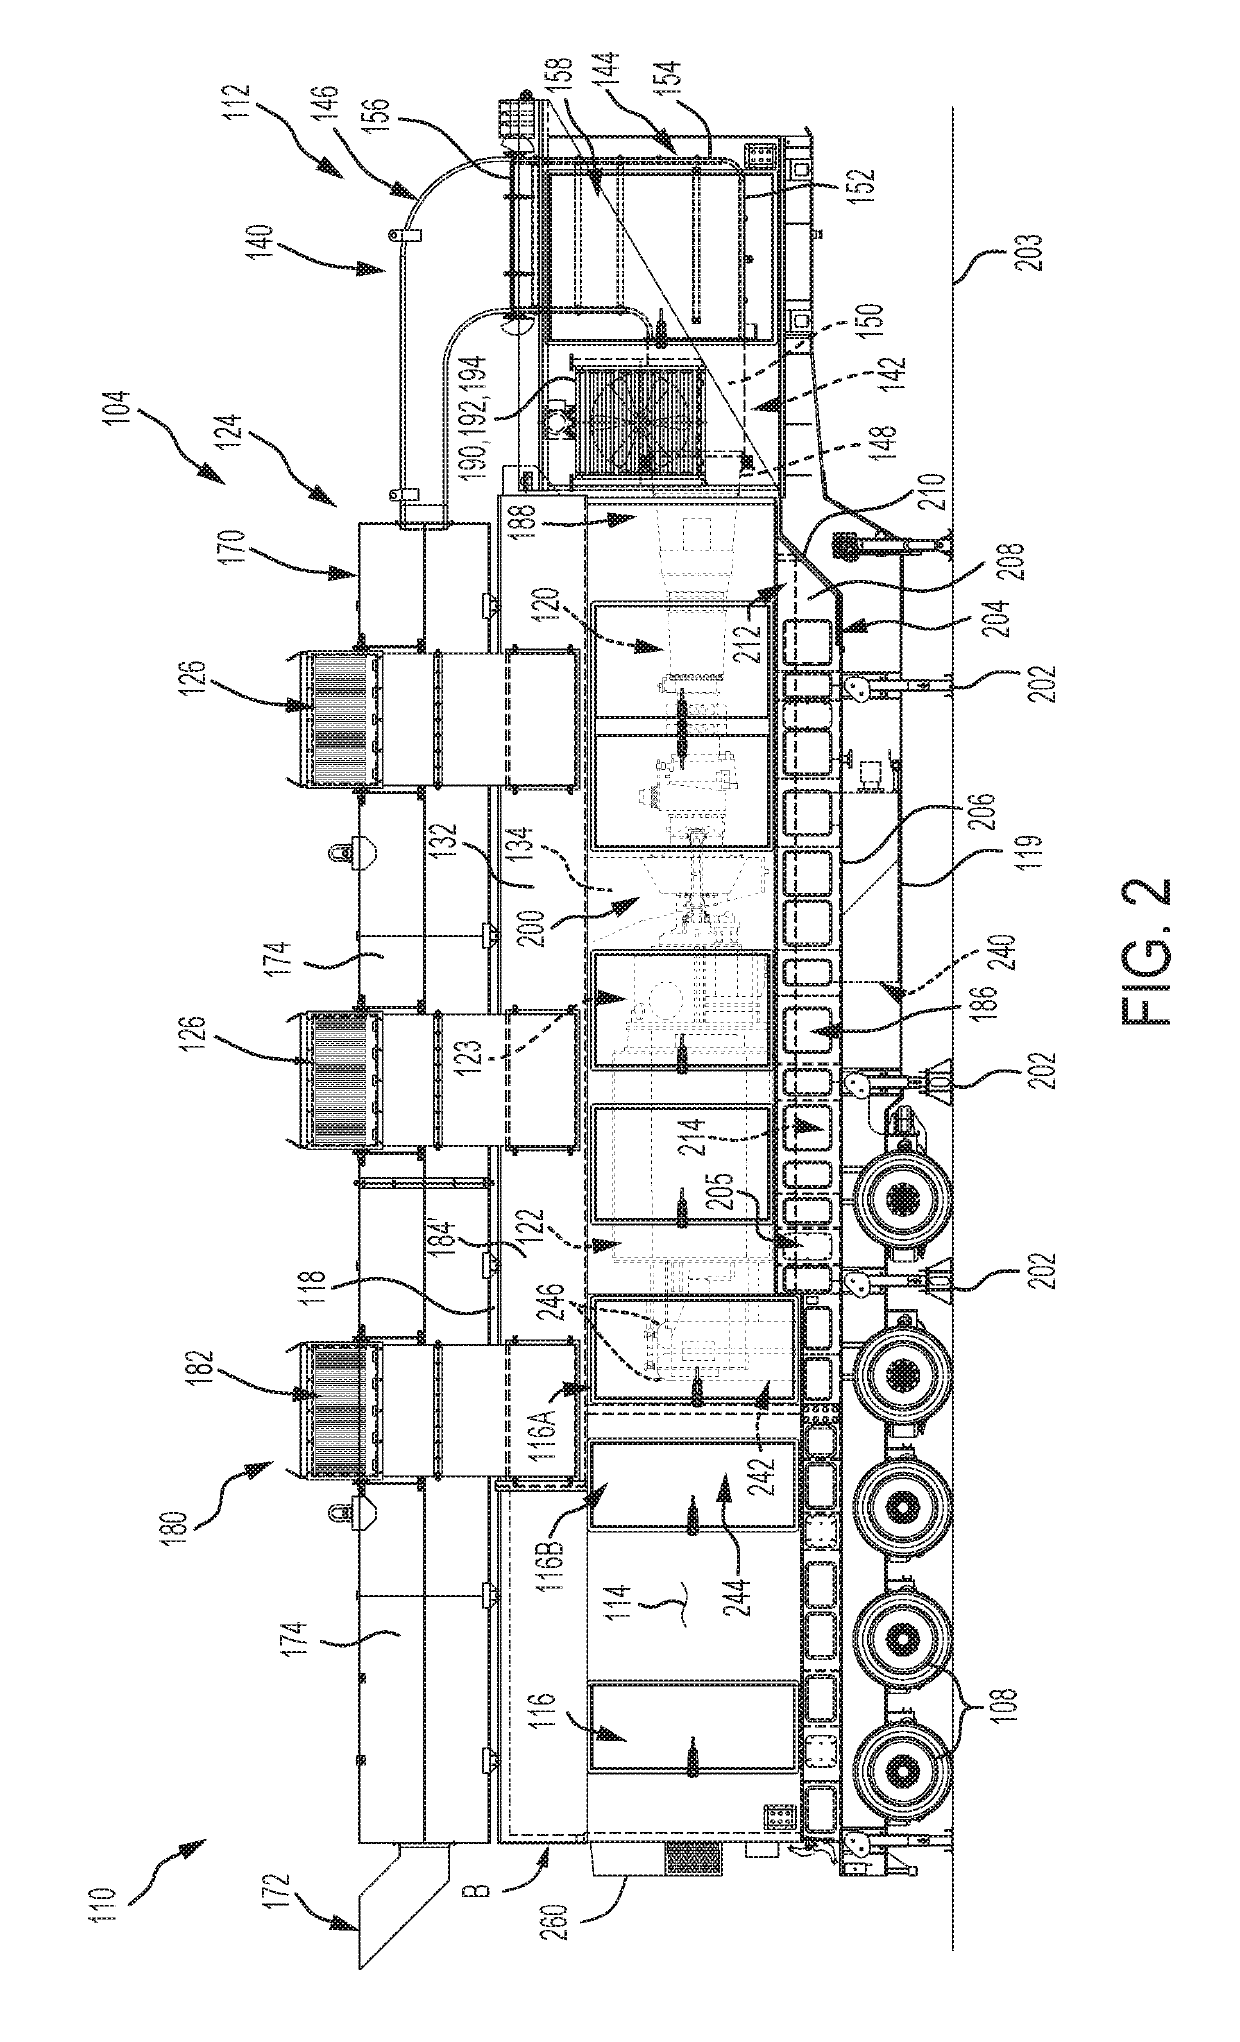 Mobile power generation system including fixture assembly